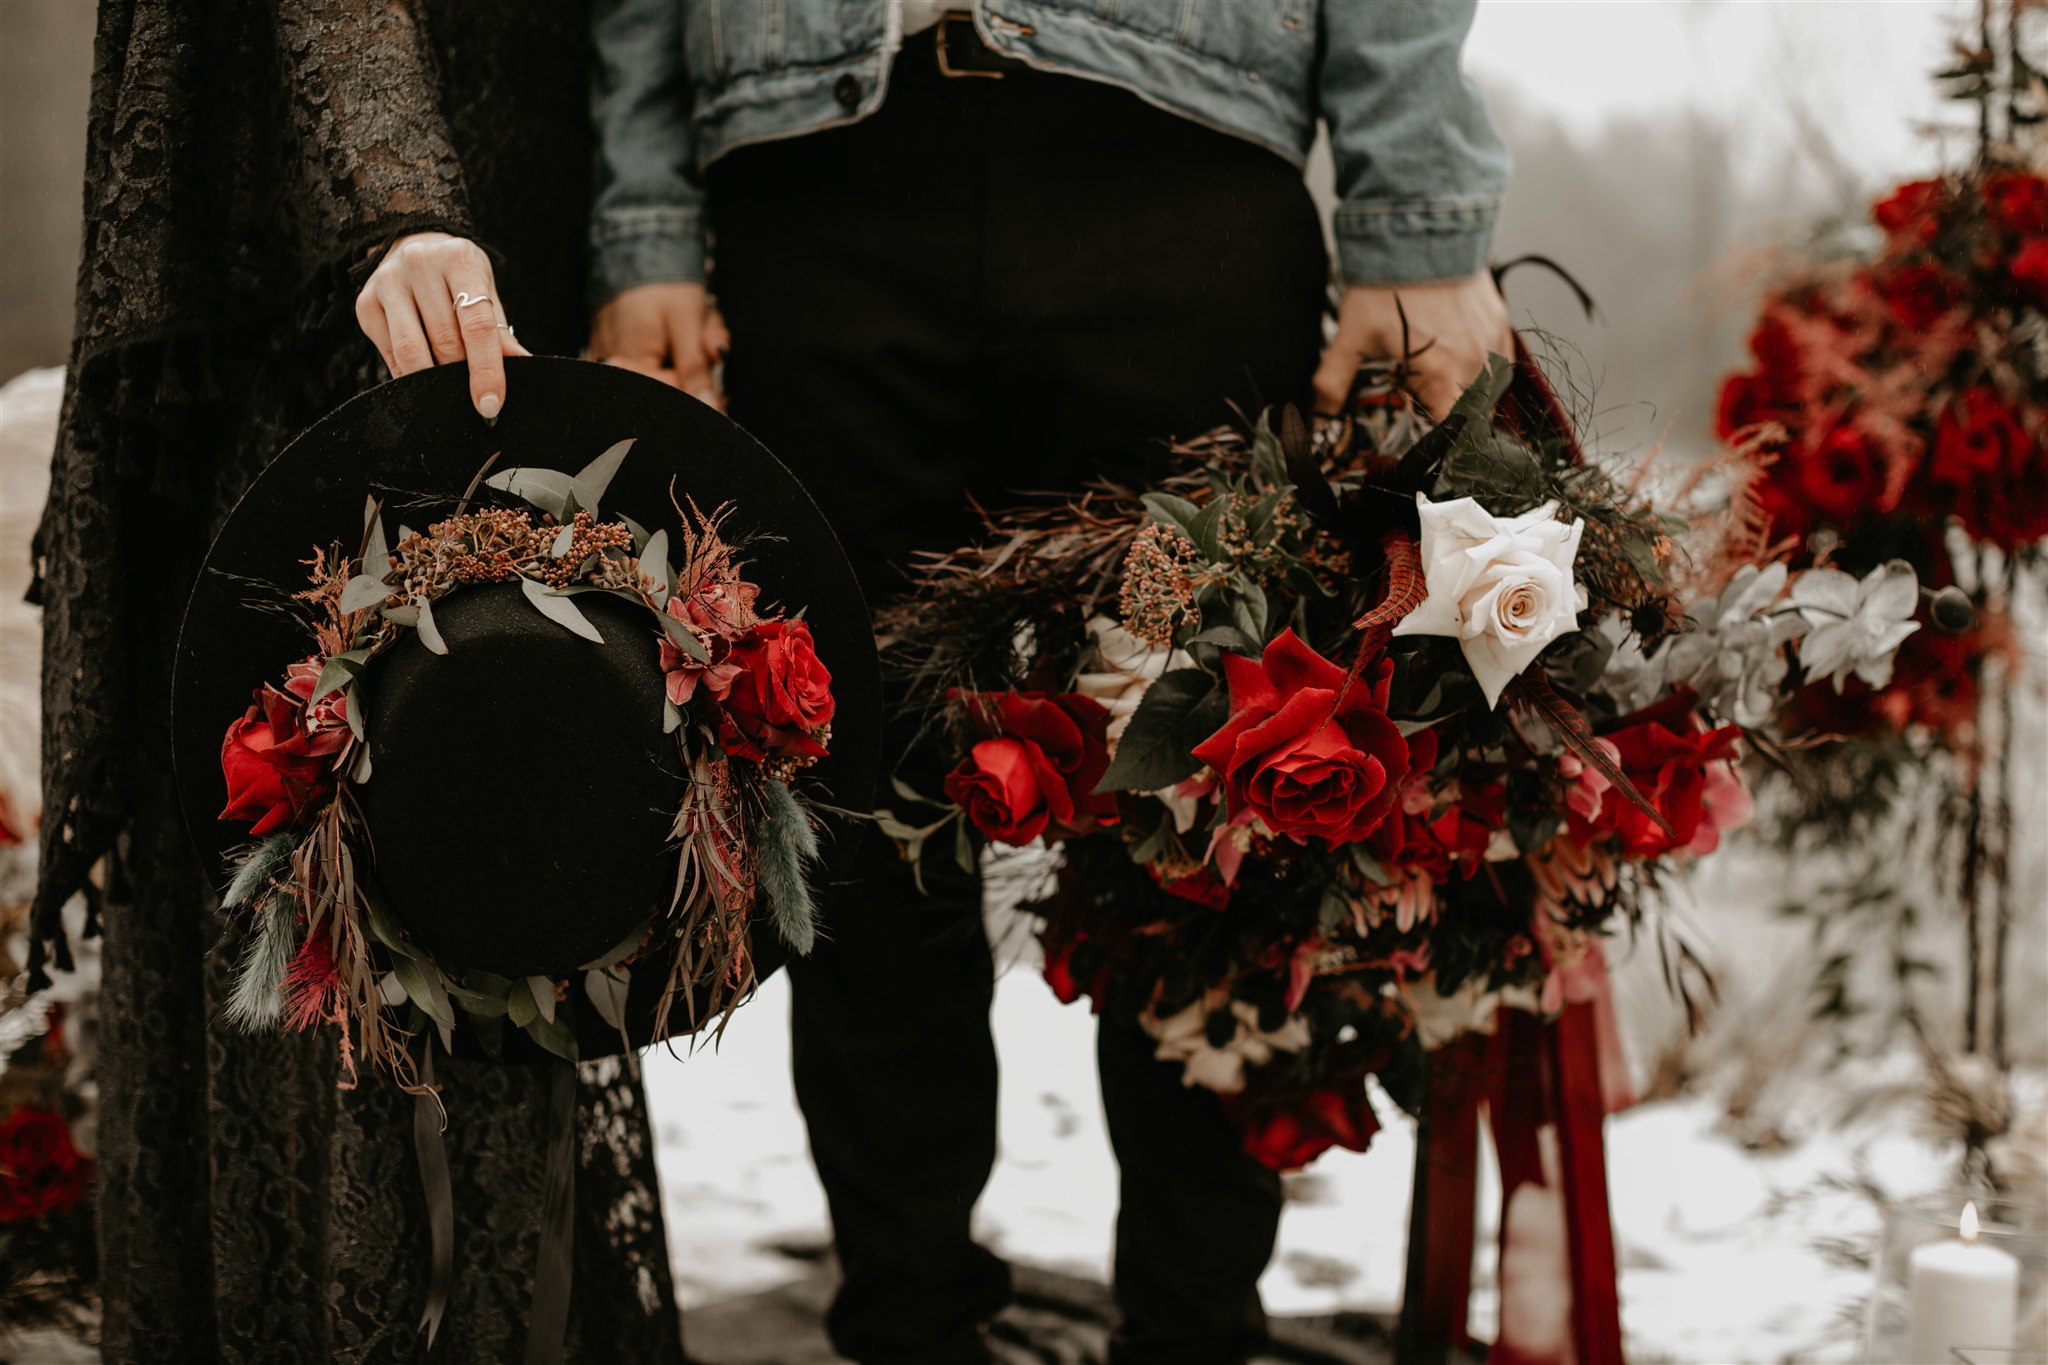 Boho chic bride in furry jacket and groom in jean jacket on snowy river bank holding boho chic red wedding bouquets